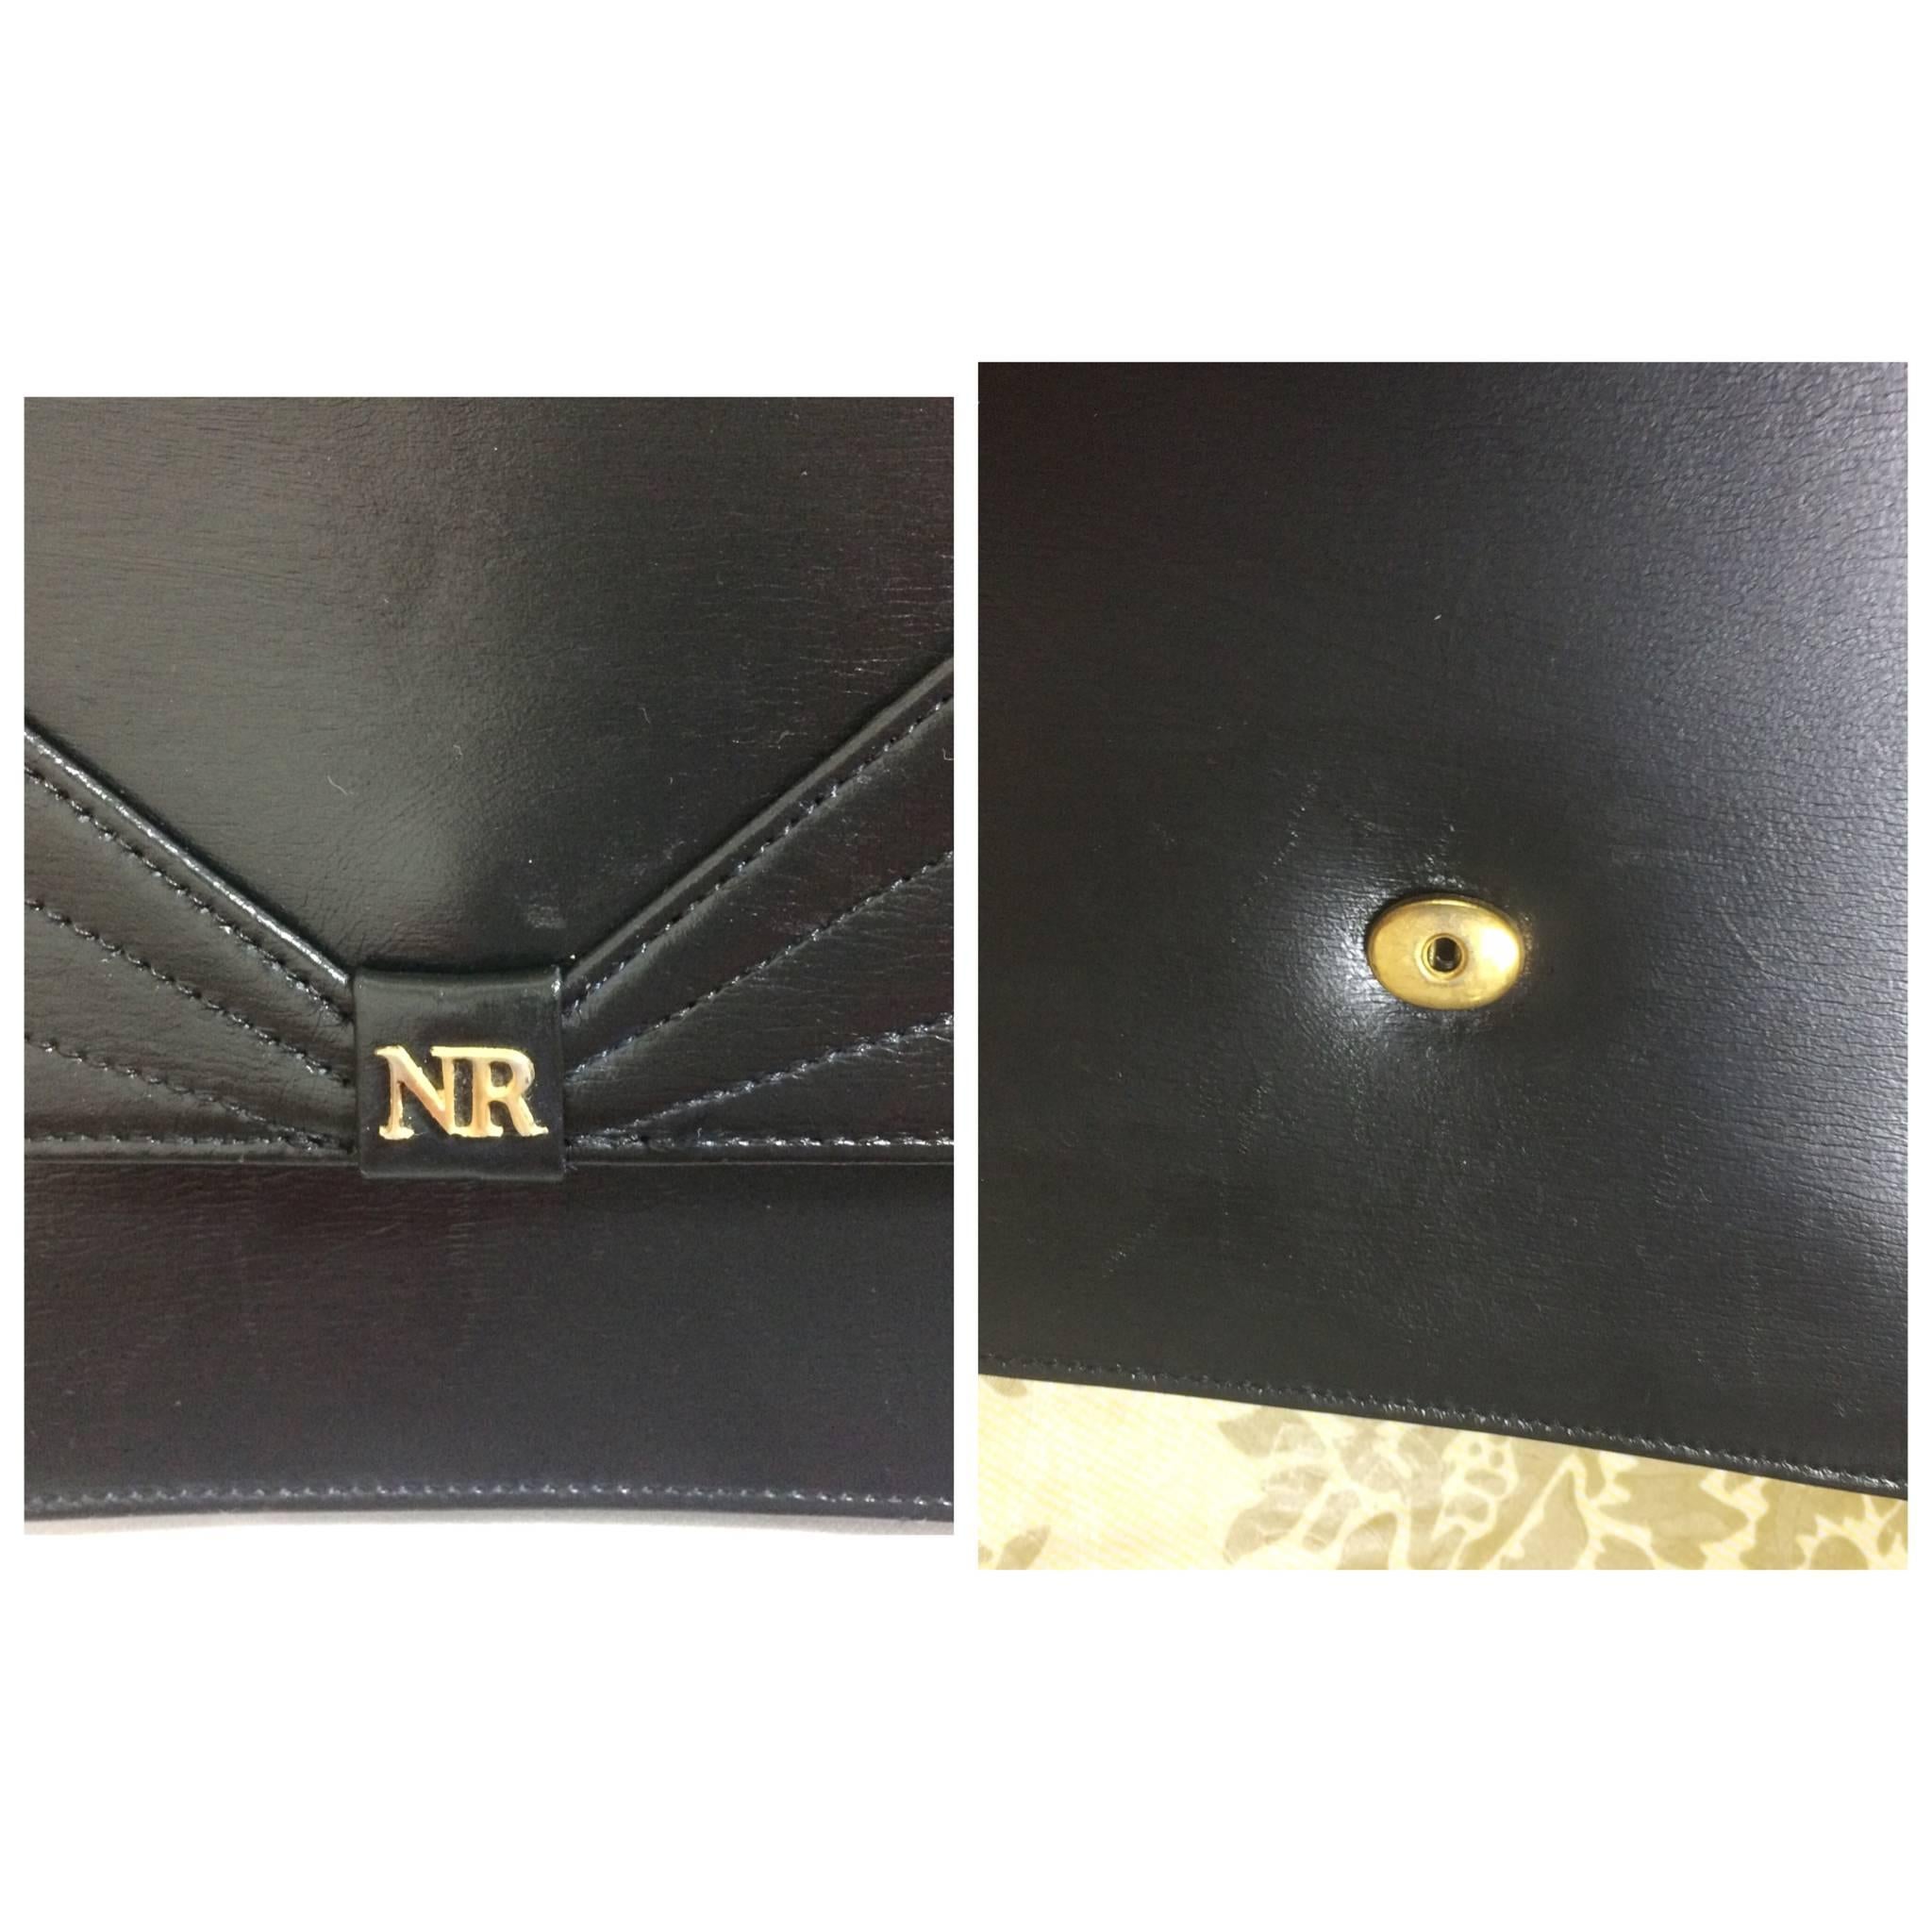 Vintage Nina Ricci black leather chain clutch shoulder bag with a bow stitch In Good Condition For Sale In Kashiwa, Chiba